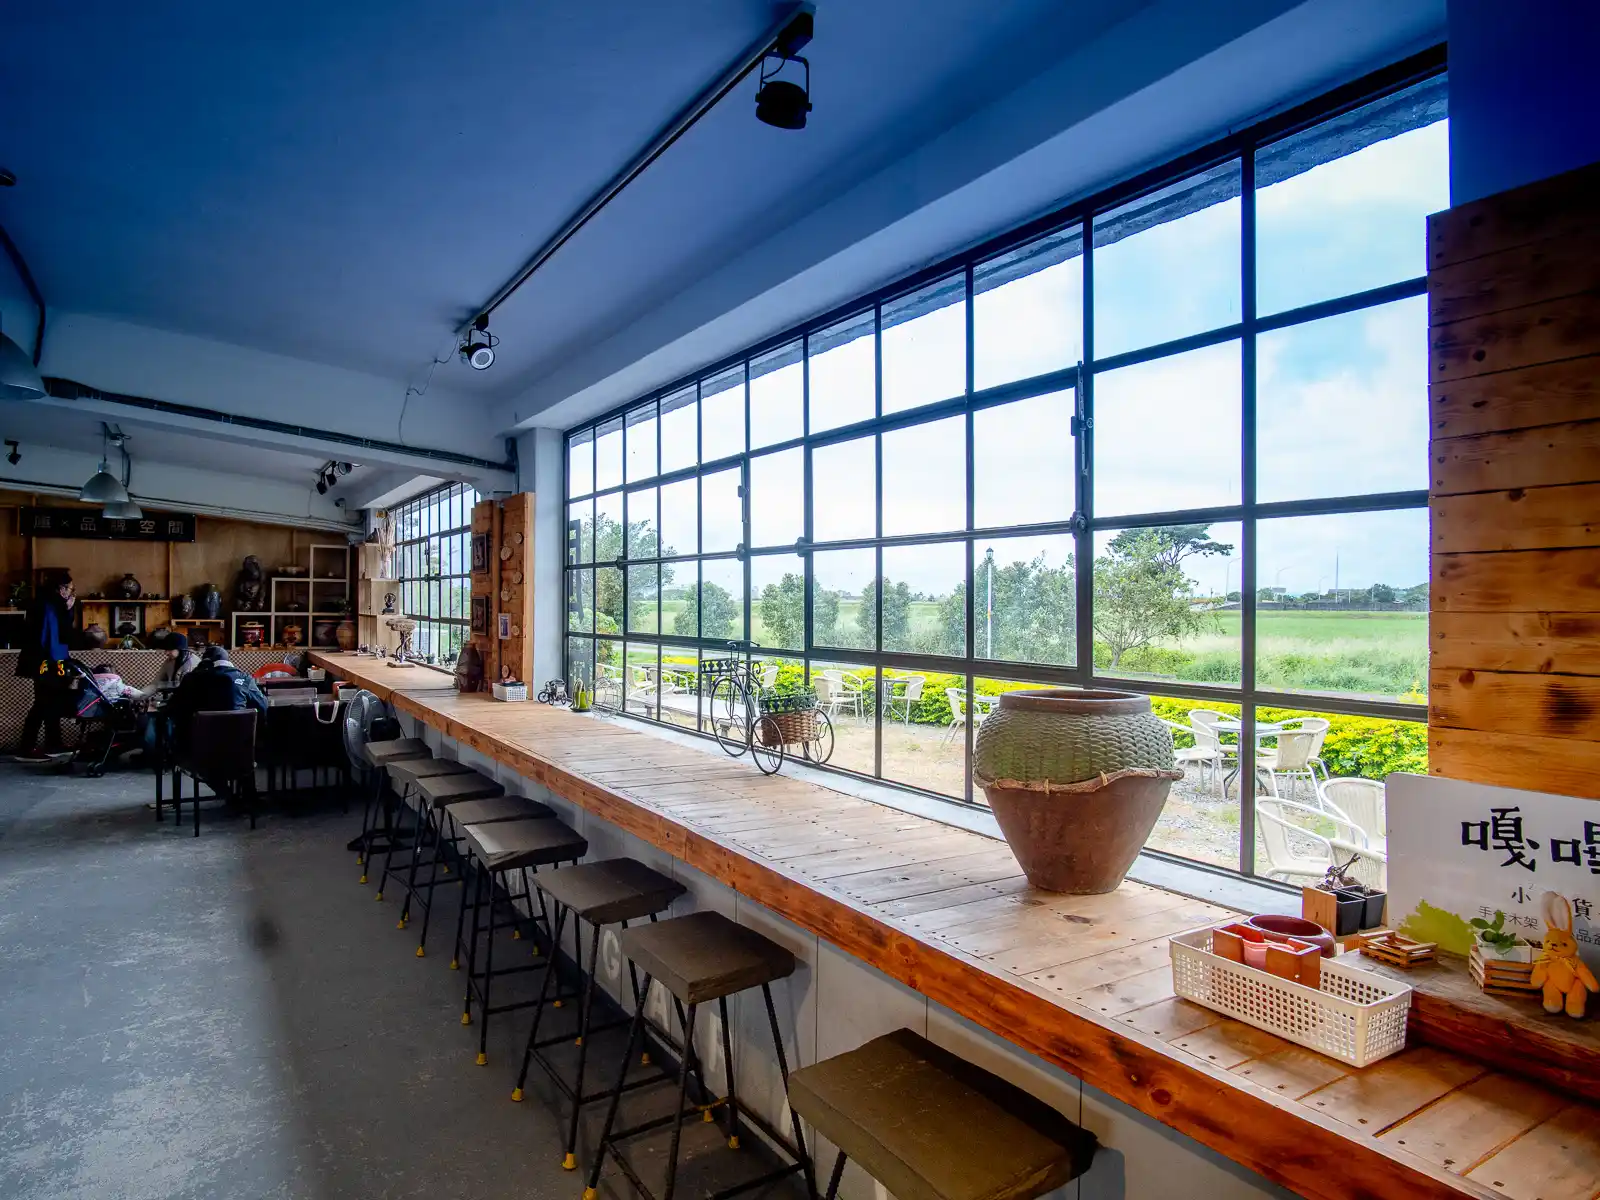 A row of windows at a cafe looks out onto rice fields.